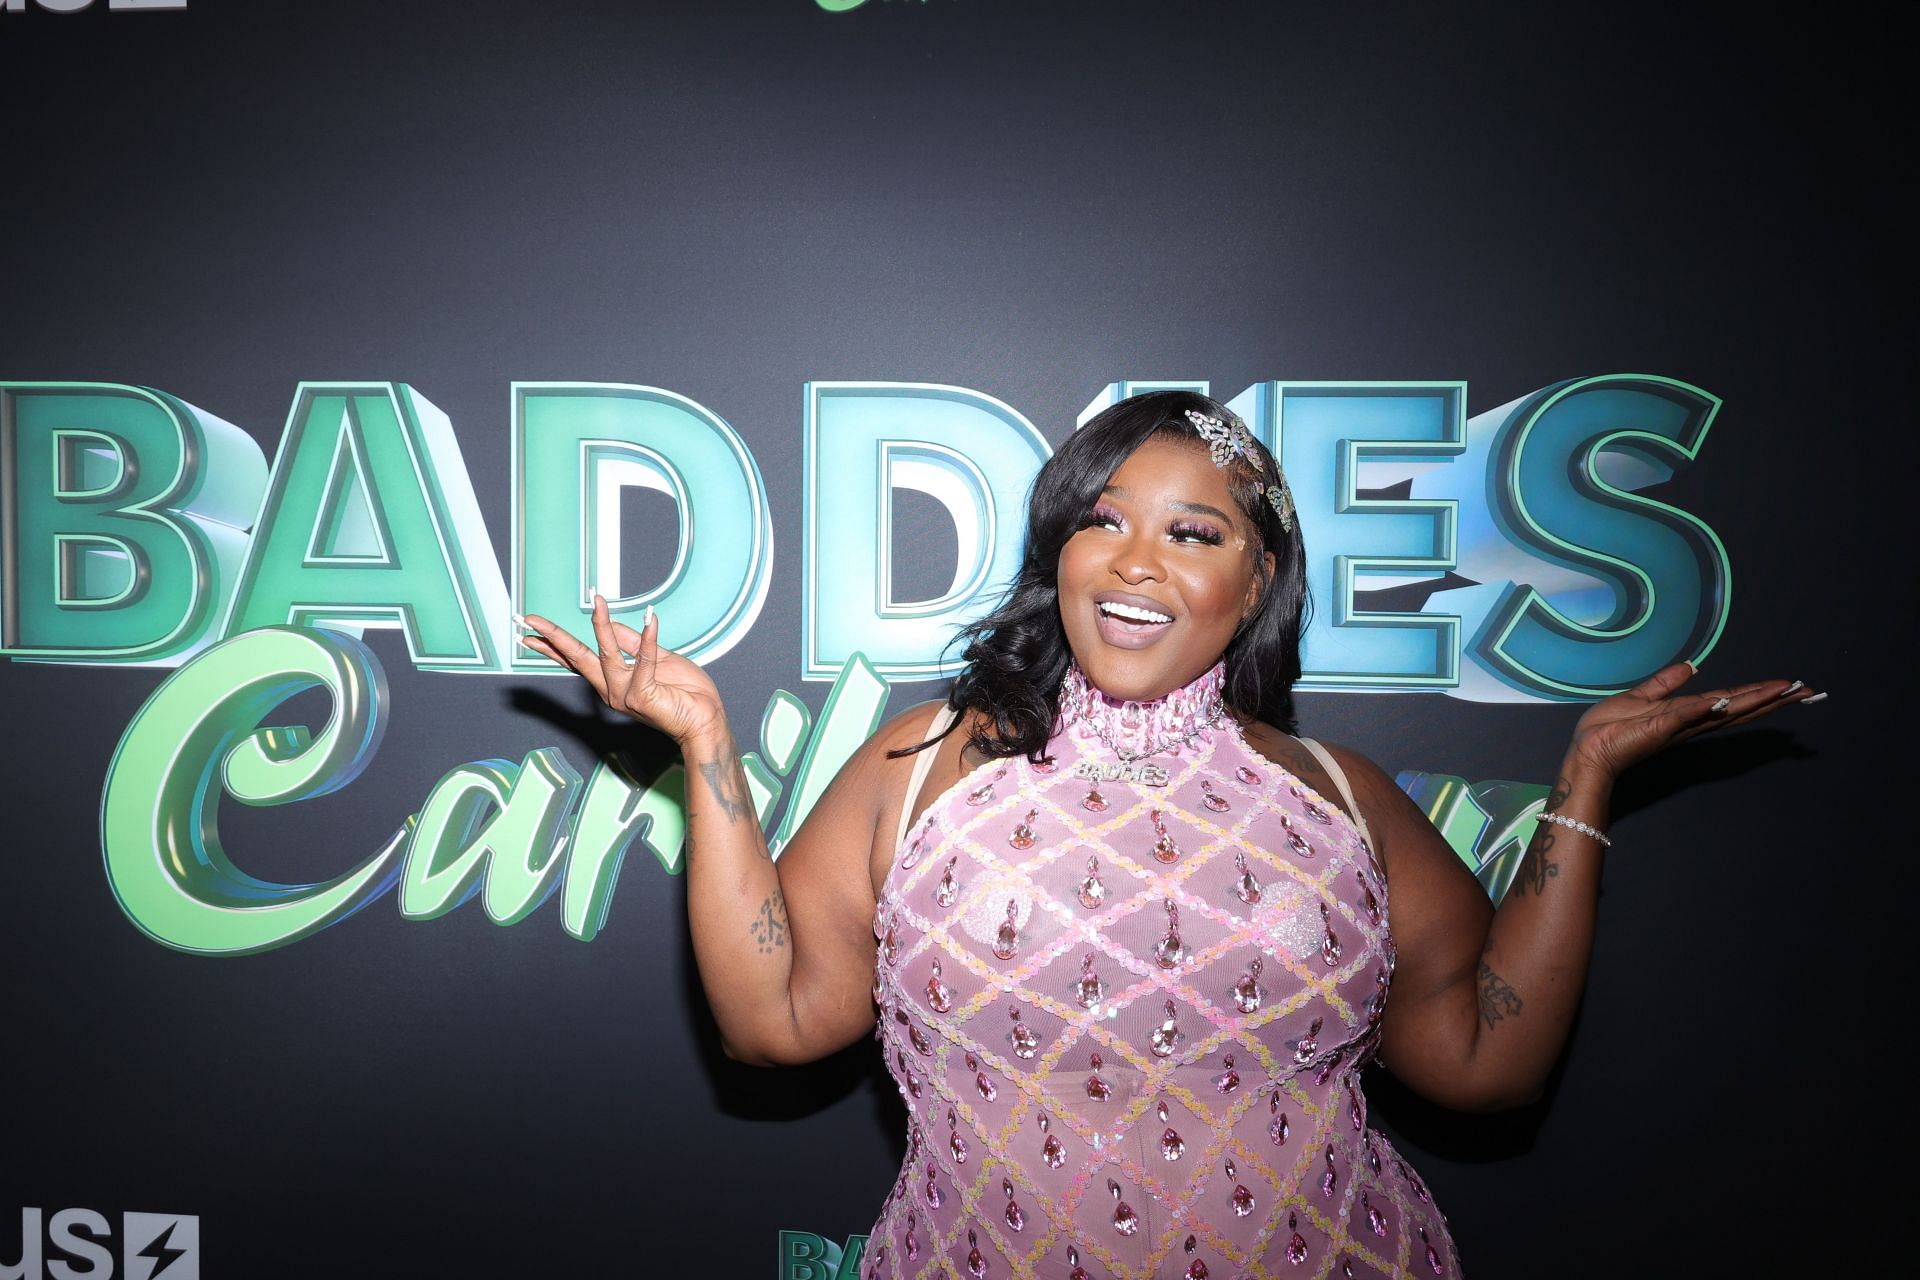 Rollie at the Baddies Caribbean Premiere (Image via Getty Images)